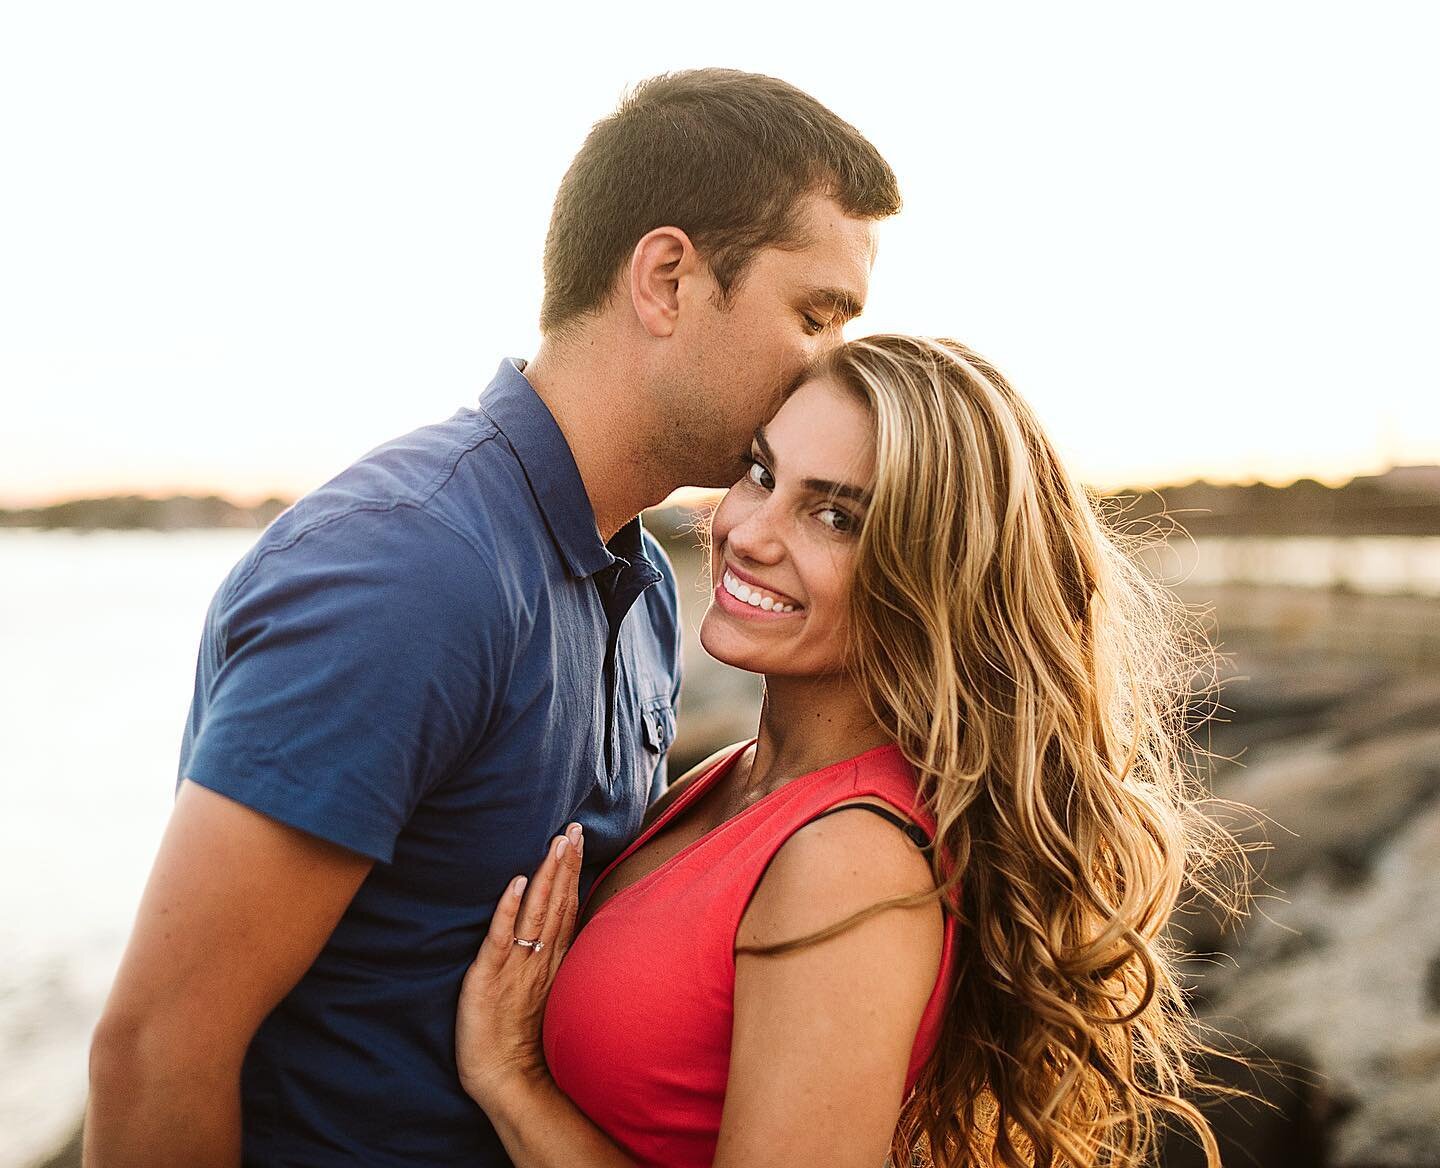 Castle Island is an awesome engagement photo spot if you&rsquo;re looking for beach vibes near Boston. It&rsquo;s one of my favorite places to hang out and watch the sunset and always seems less crowded than the North Shore beaches - perfect for taki